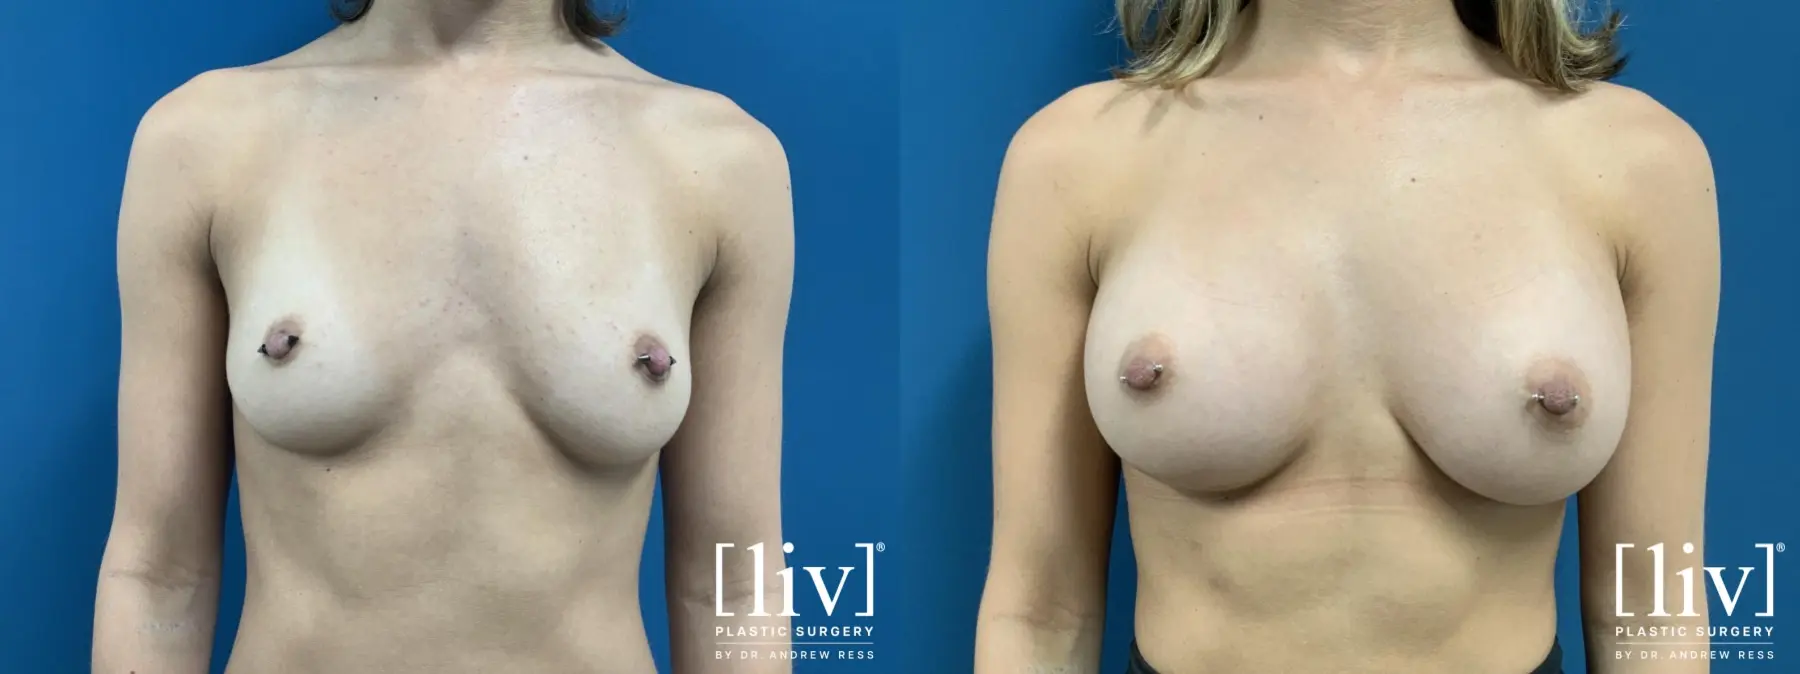 Breast Augmentation: Patient 1 - Before and After  